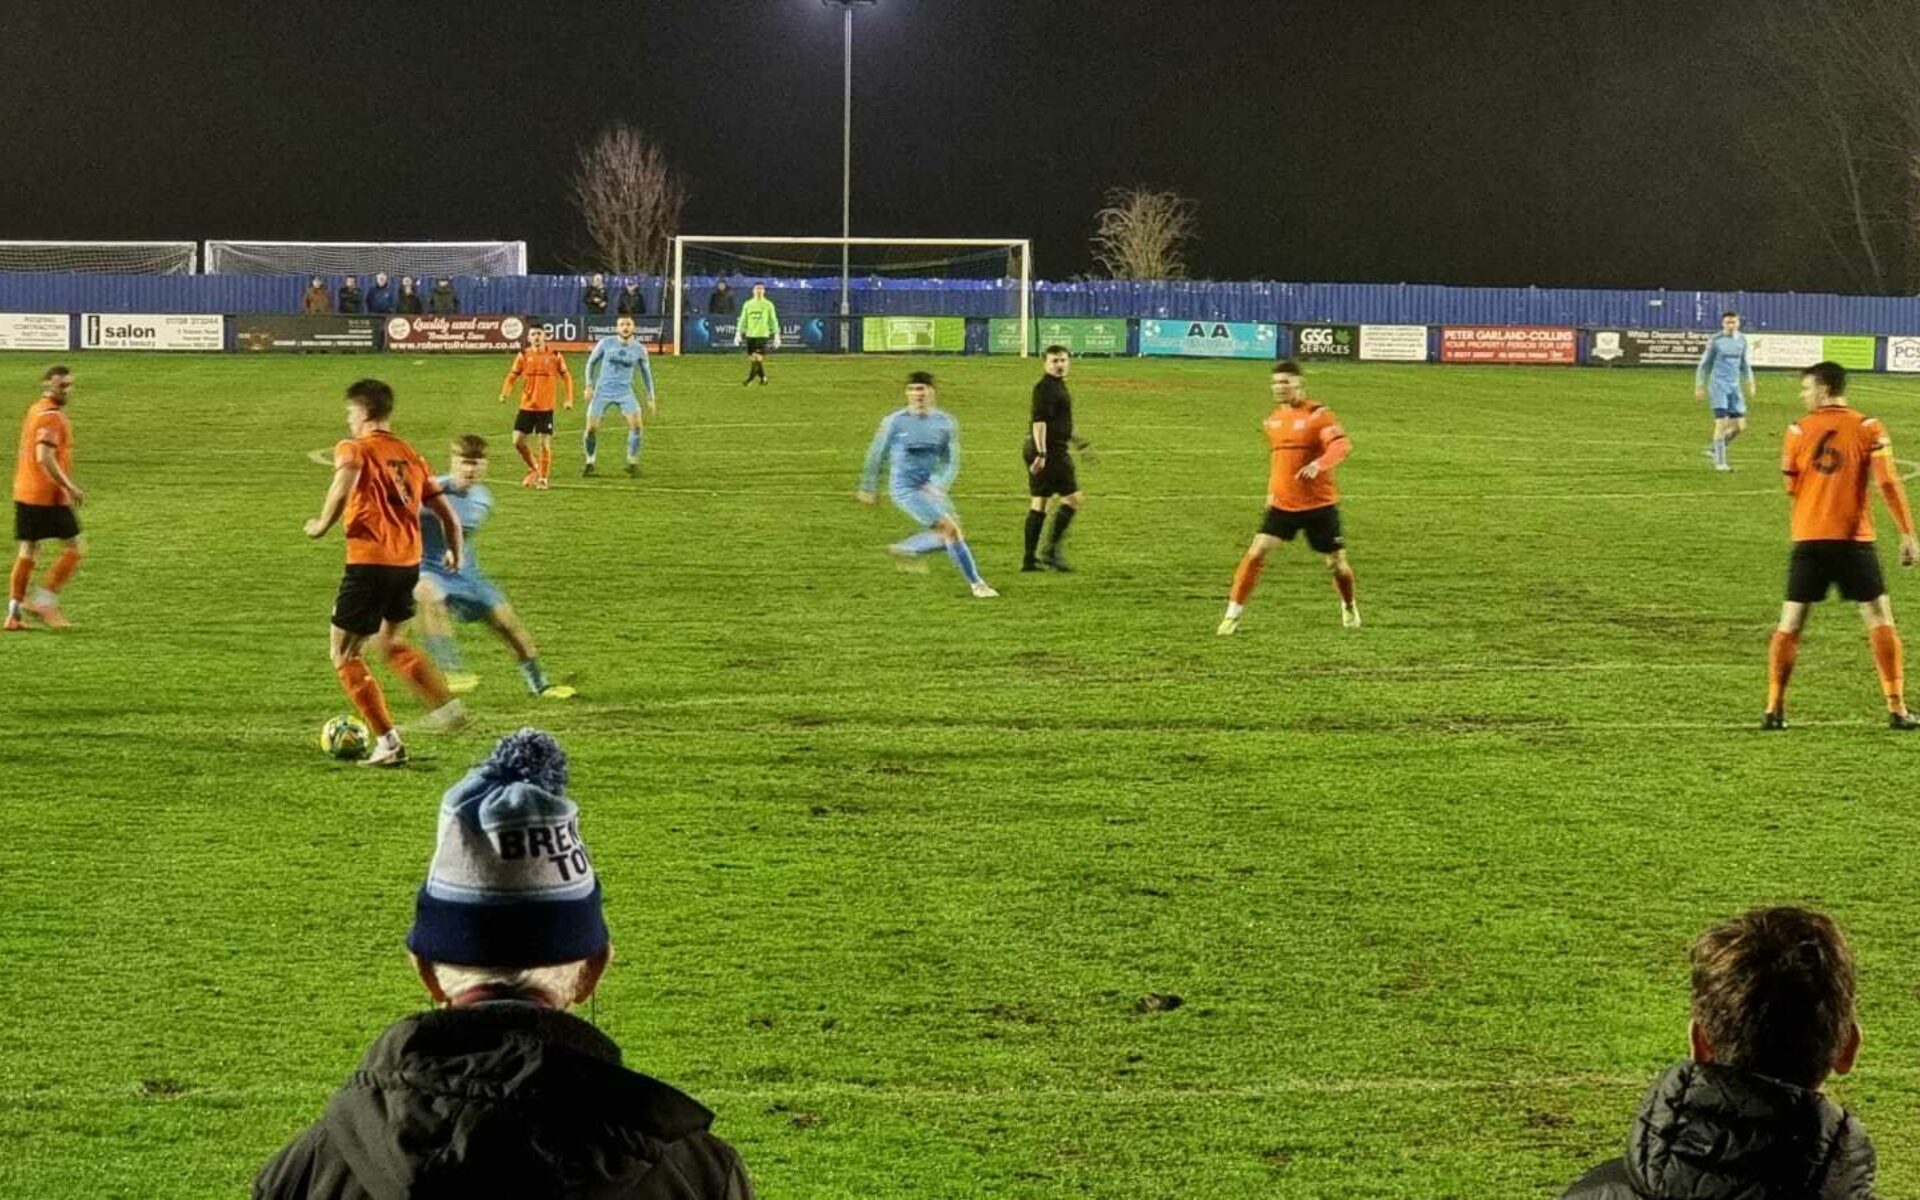 Floodlight failure ends Bury Town fixture Featured Image